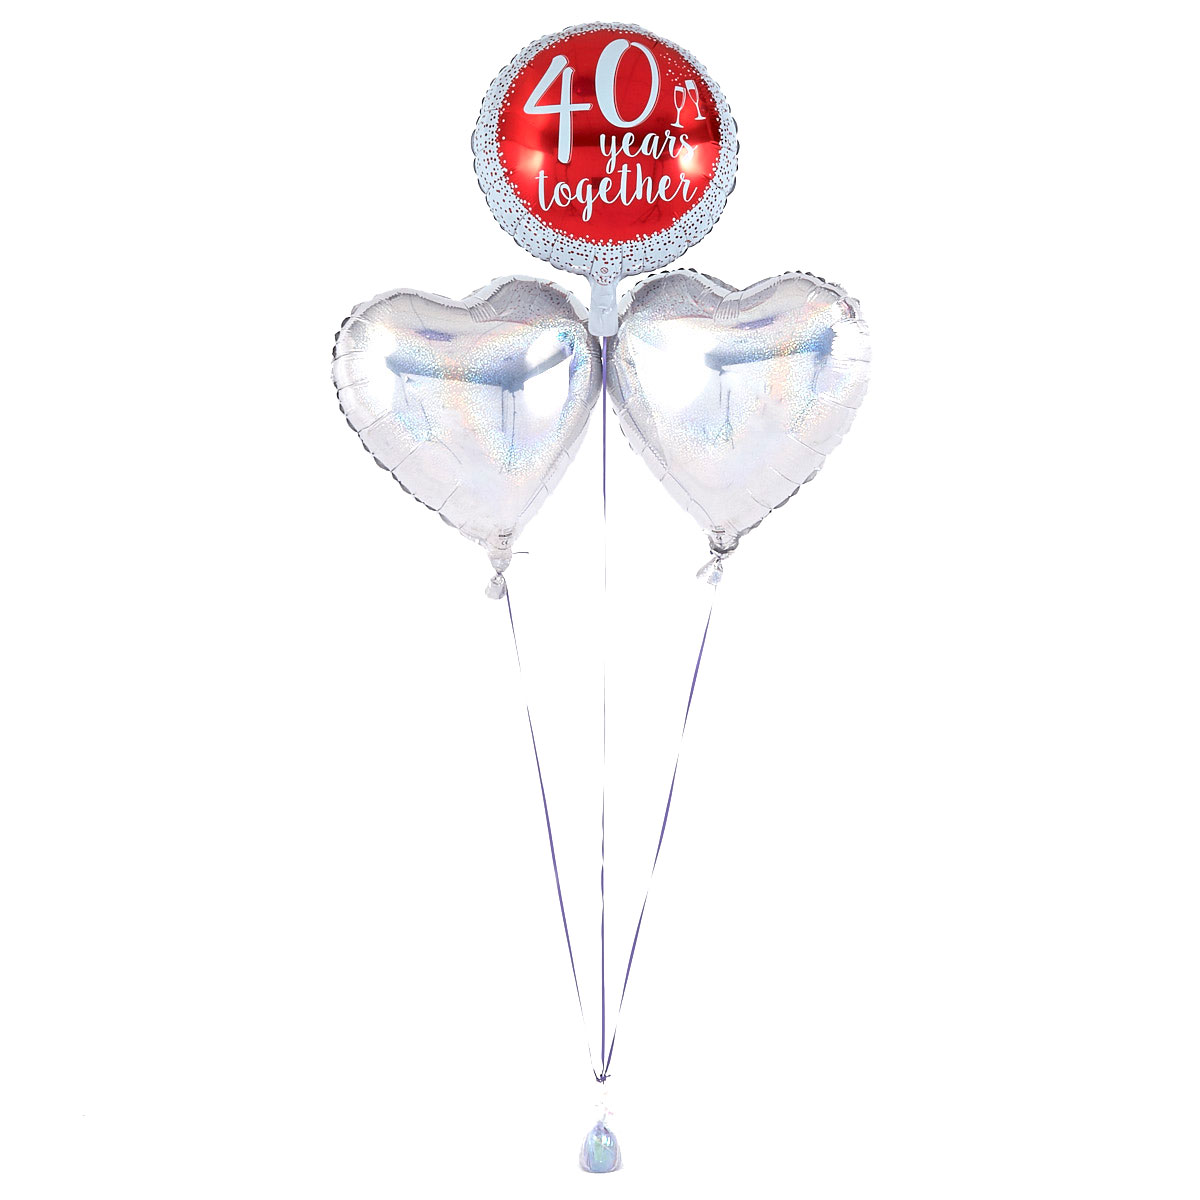 40th Anniversary Ruby Wedding Romantic Balloon Bouquet - DELIVERED INFLATED!